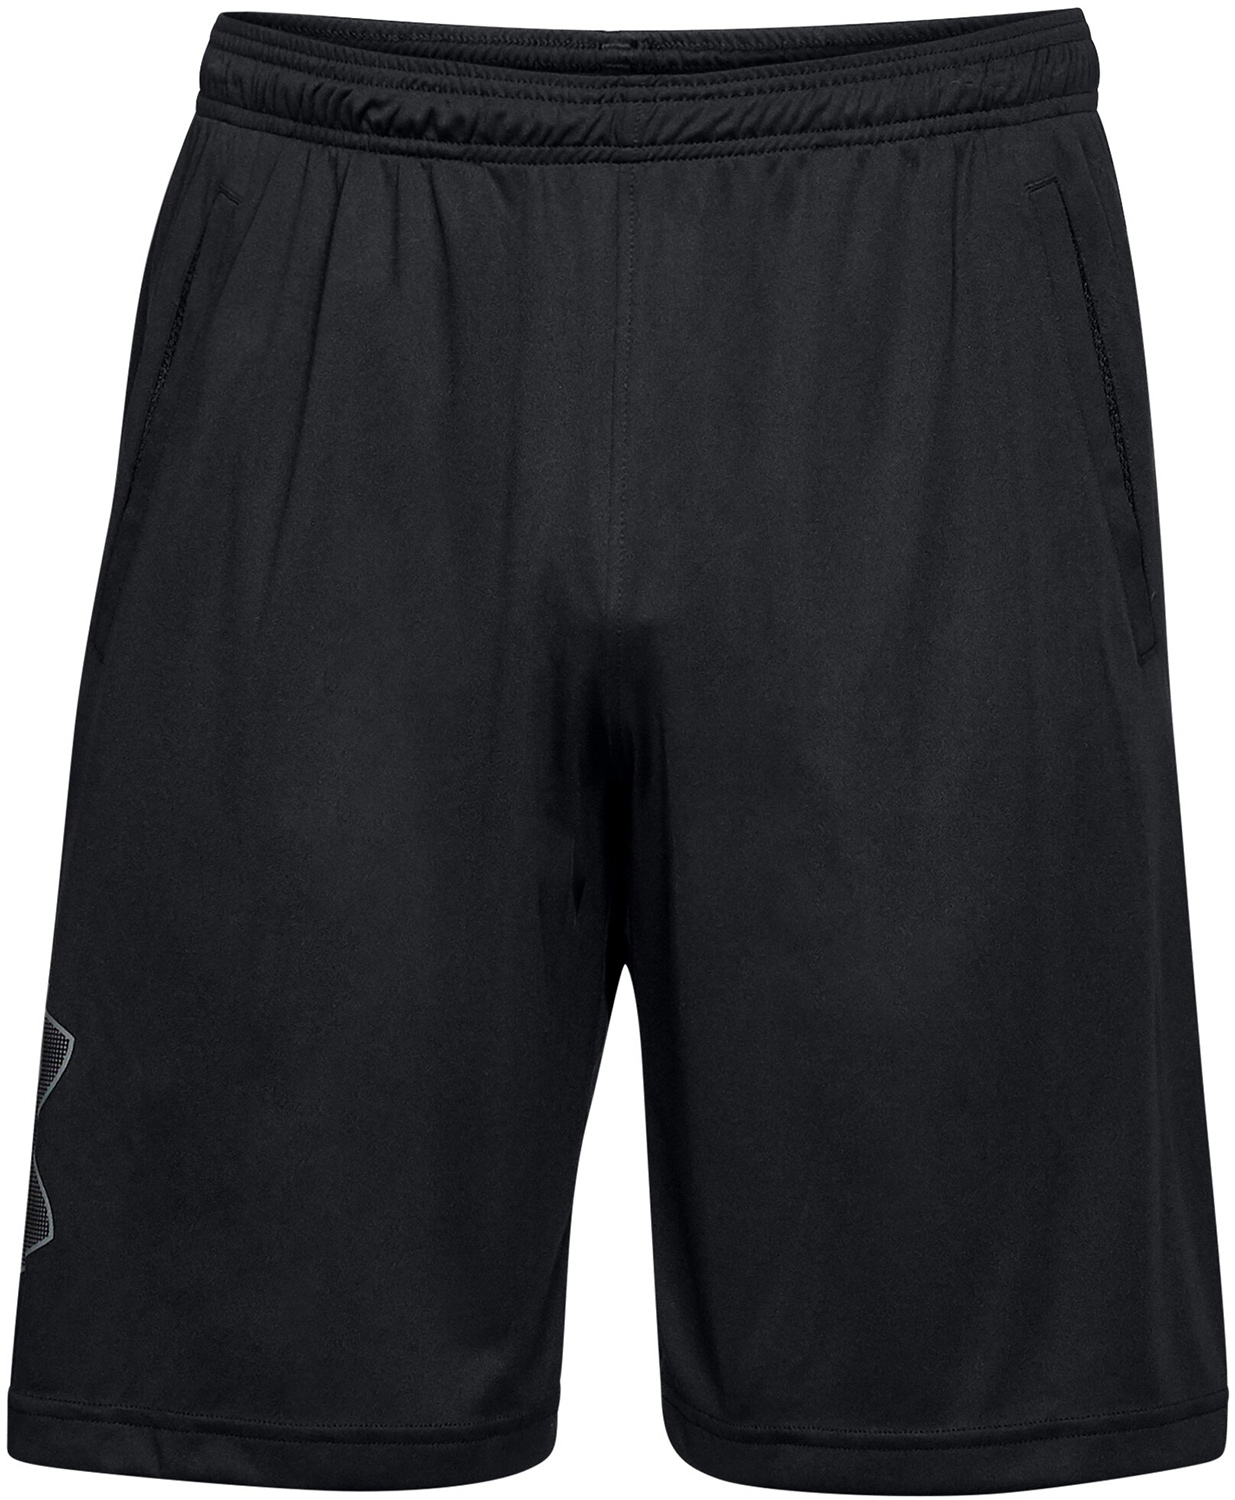 Under Armour Men's Graphite Pocketed Raid Shorts, 60% OFF